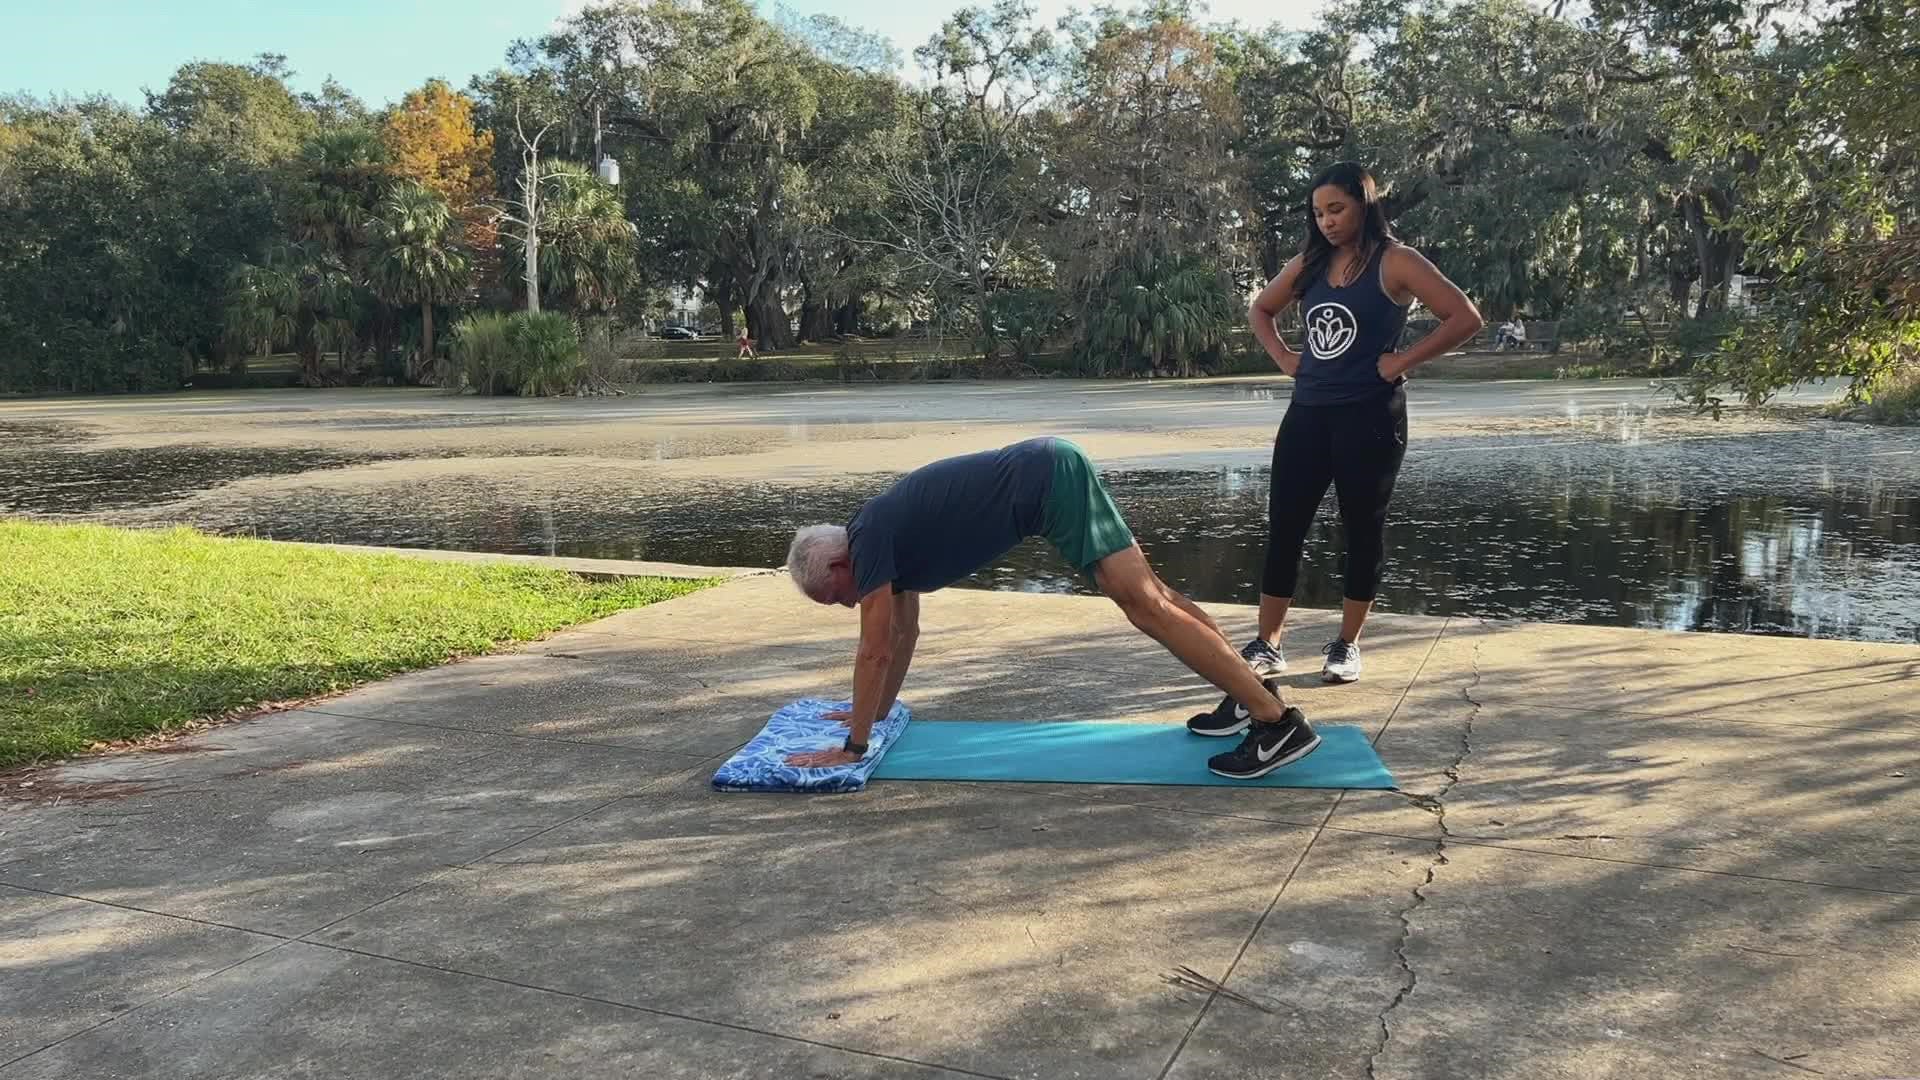 Mackie and April show you one more core workout to end the first month of 2022.